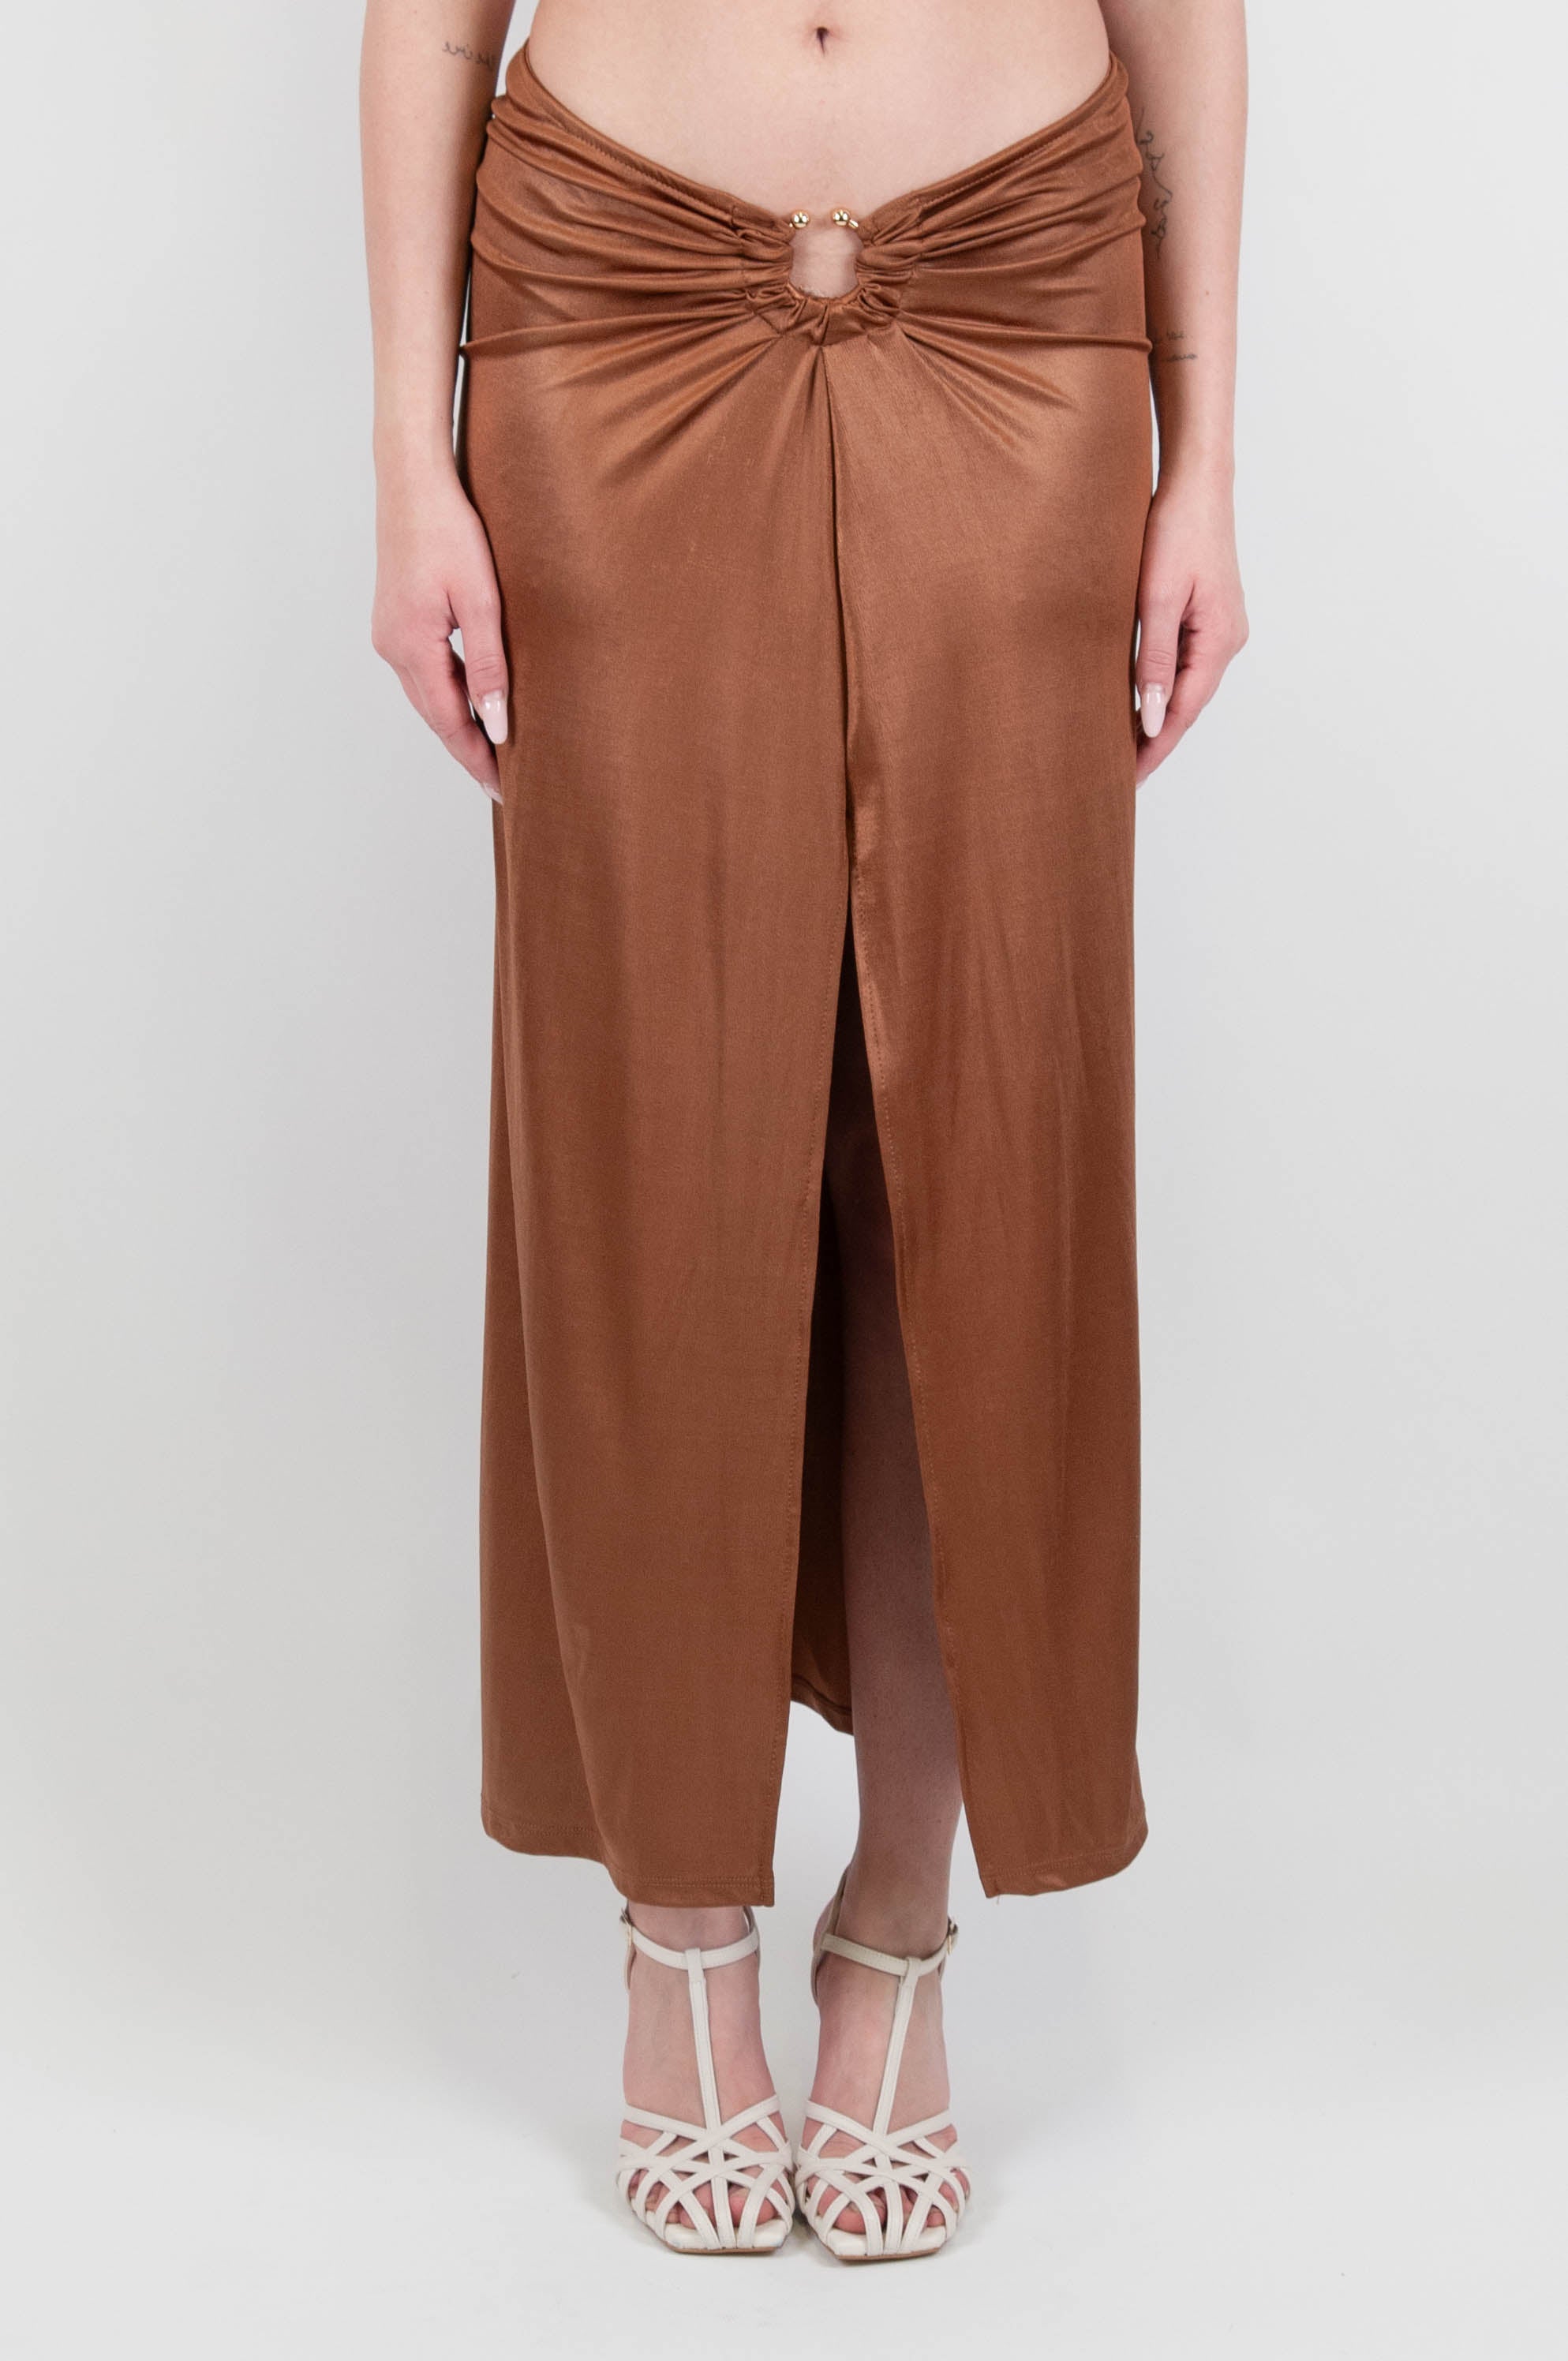 Haveone - Midi skirt with slit and gathered front